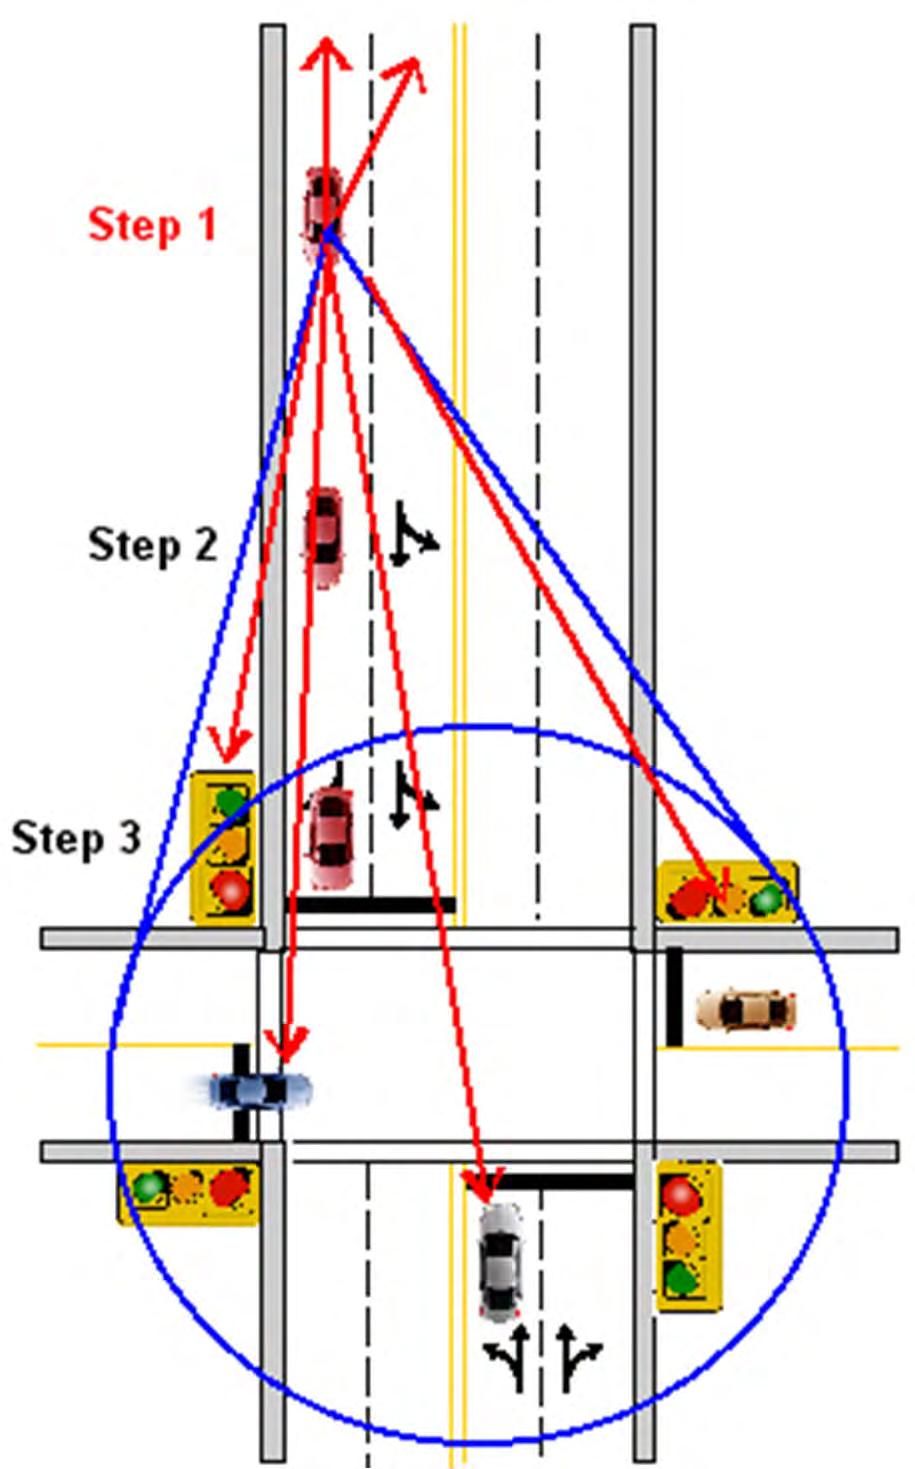 Topic 3 Lesson 2 Approach to Intersection Step 1 (Search) Identify the intersection. - Determine the type of intersection and number of intersecting roadways.